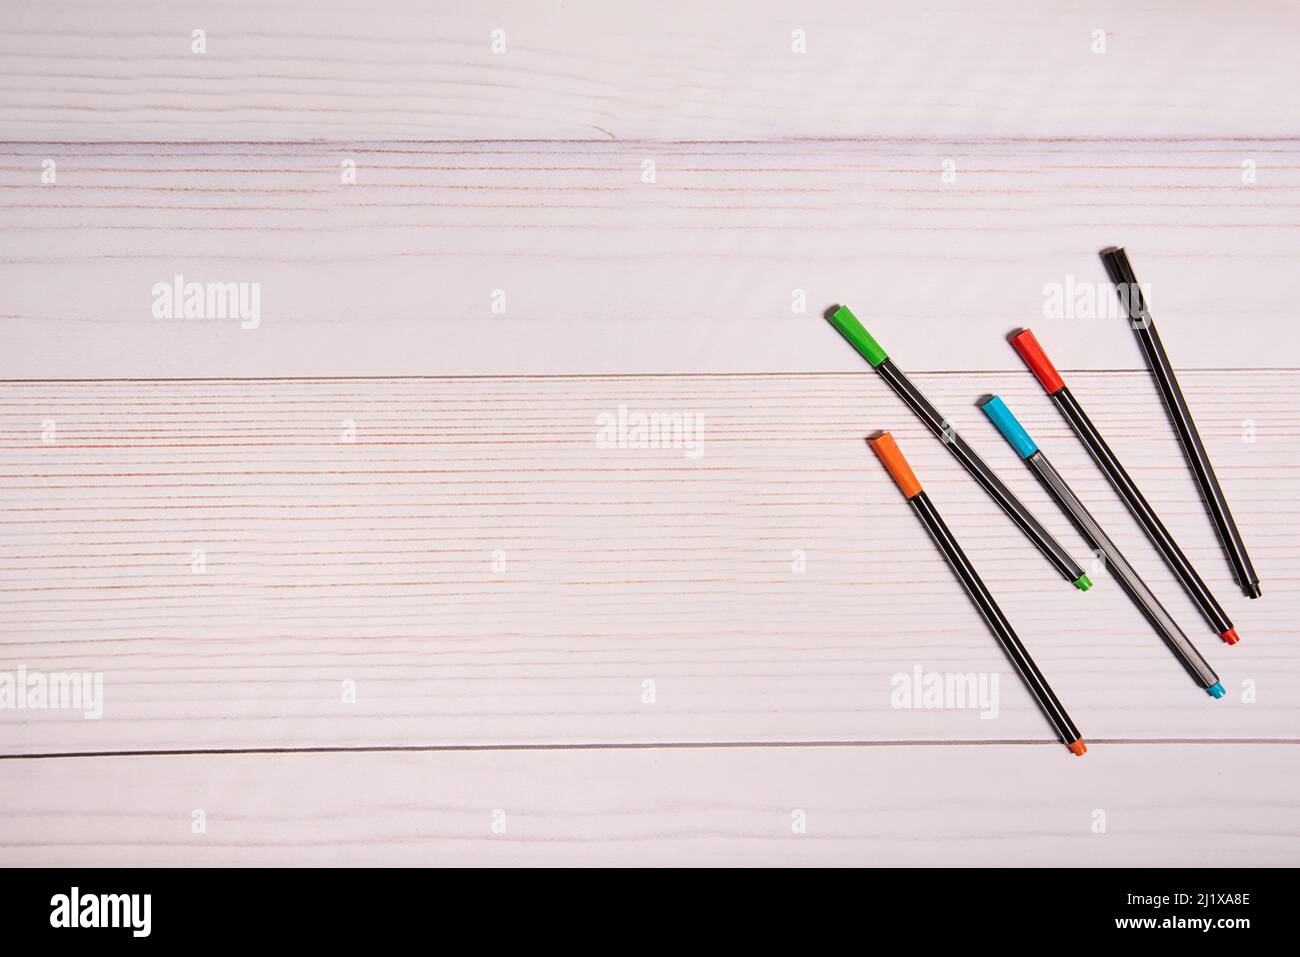 PENS OF DIFFERENT COLORS, ON WHITE WOODEN TABLE. Stock Photo